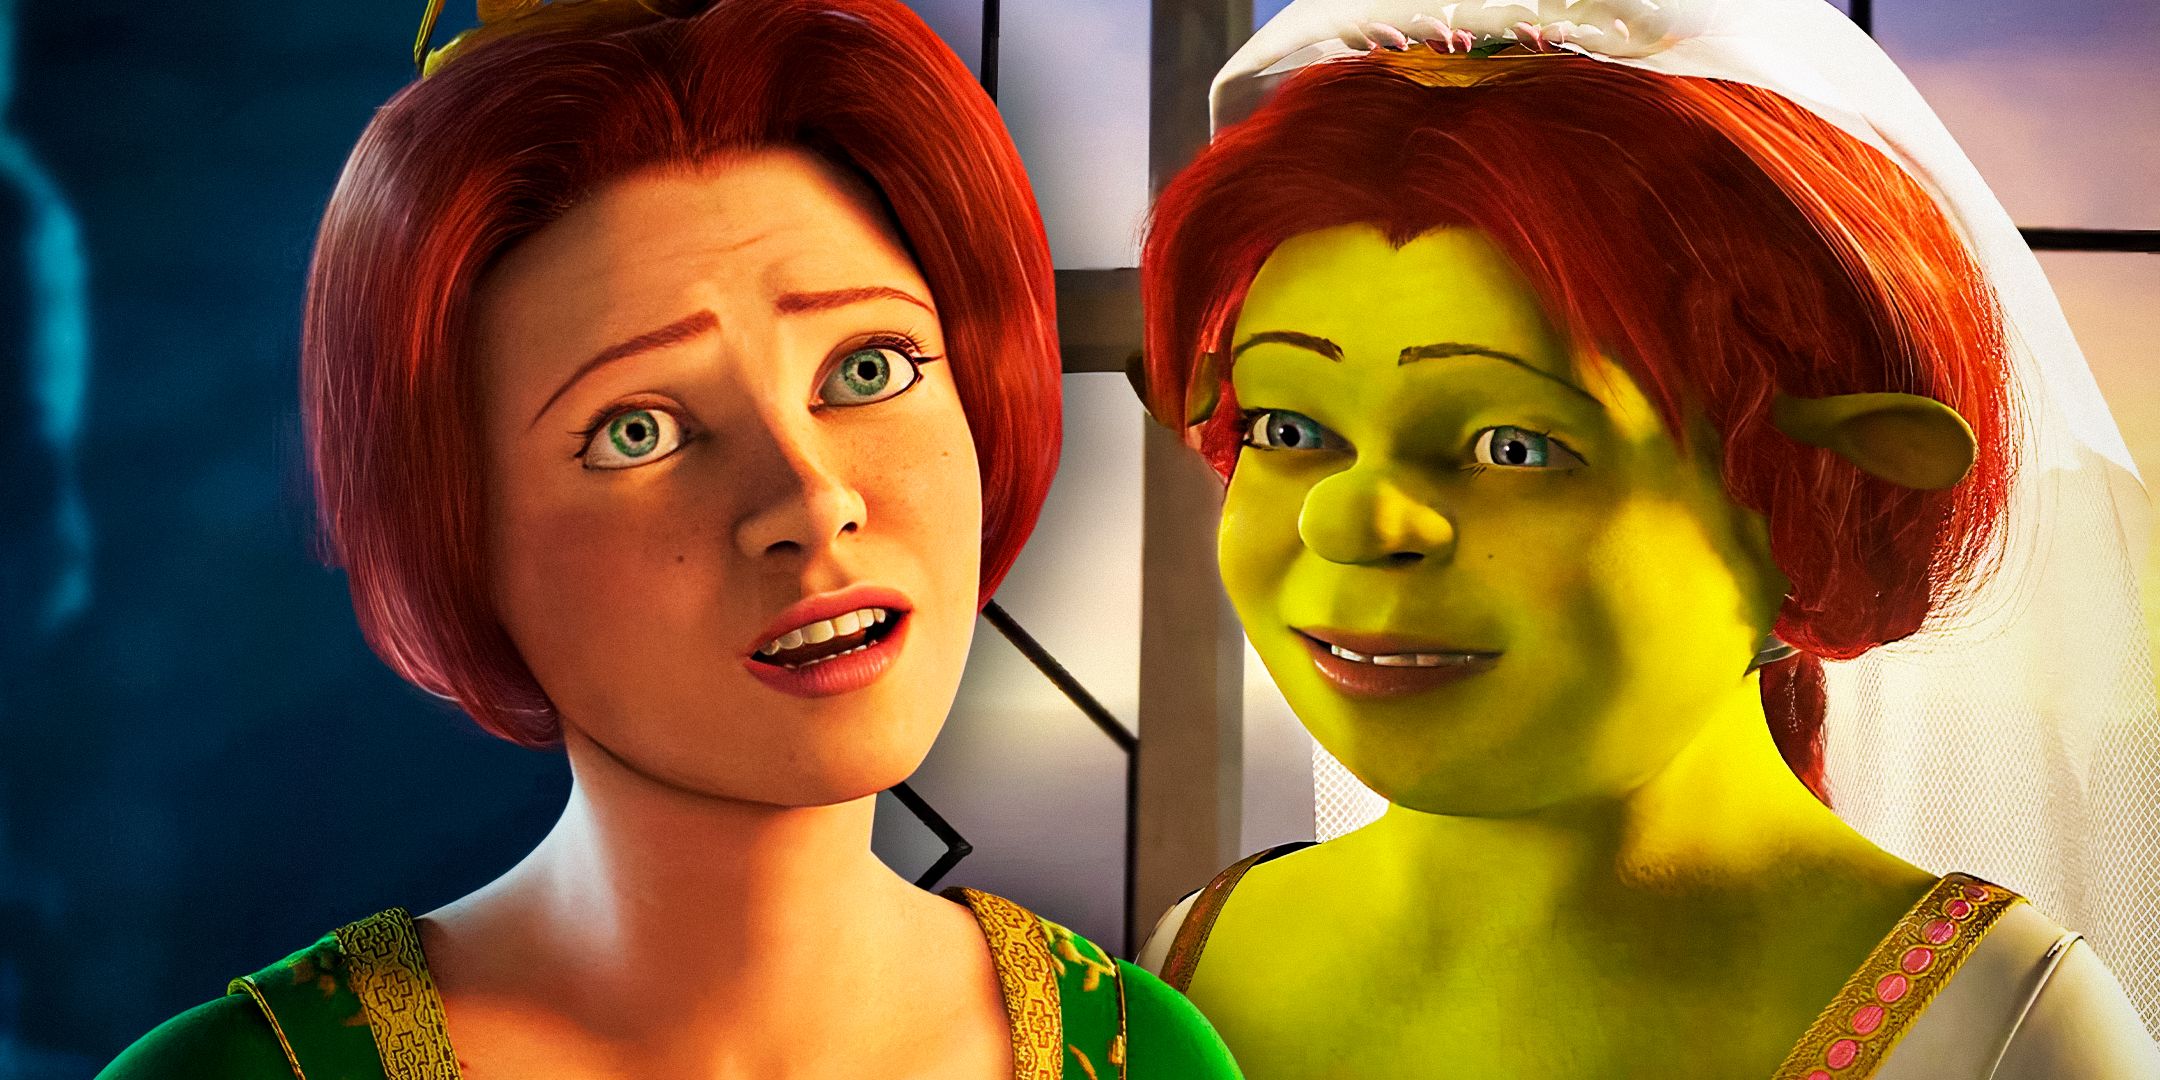 Shrek Fiona in human form and in ogre form at her wedding